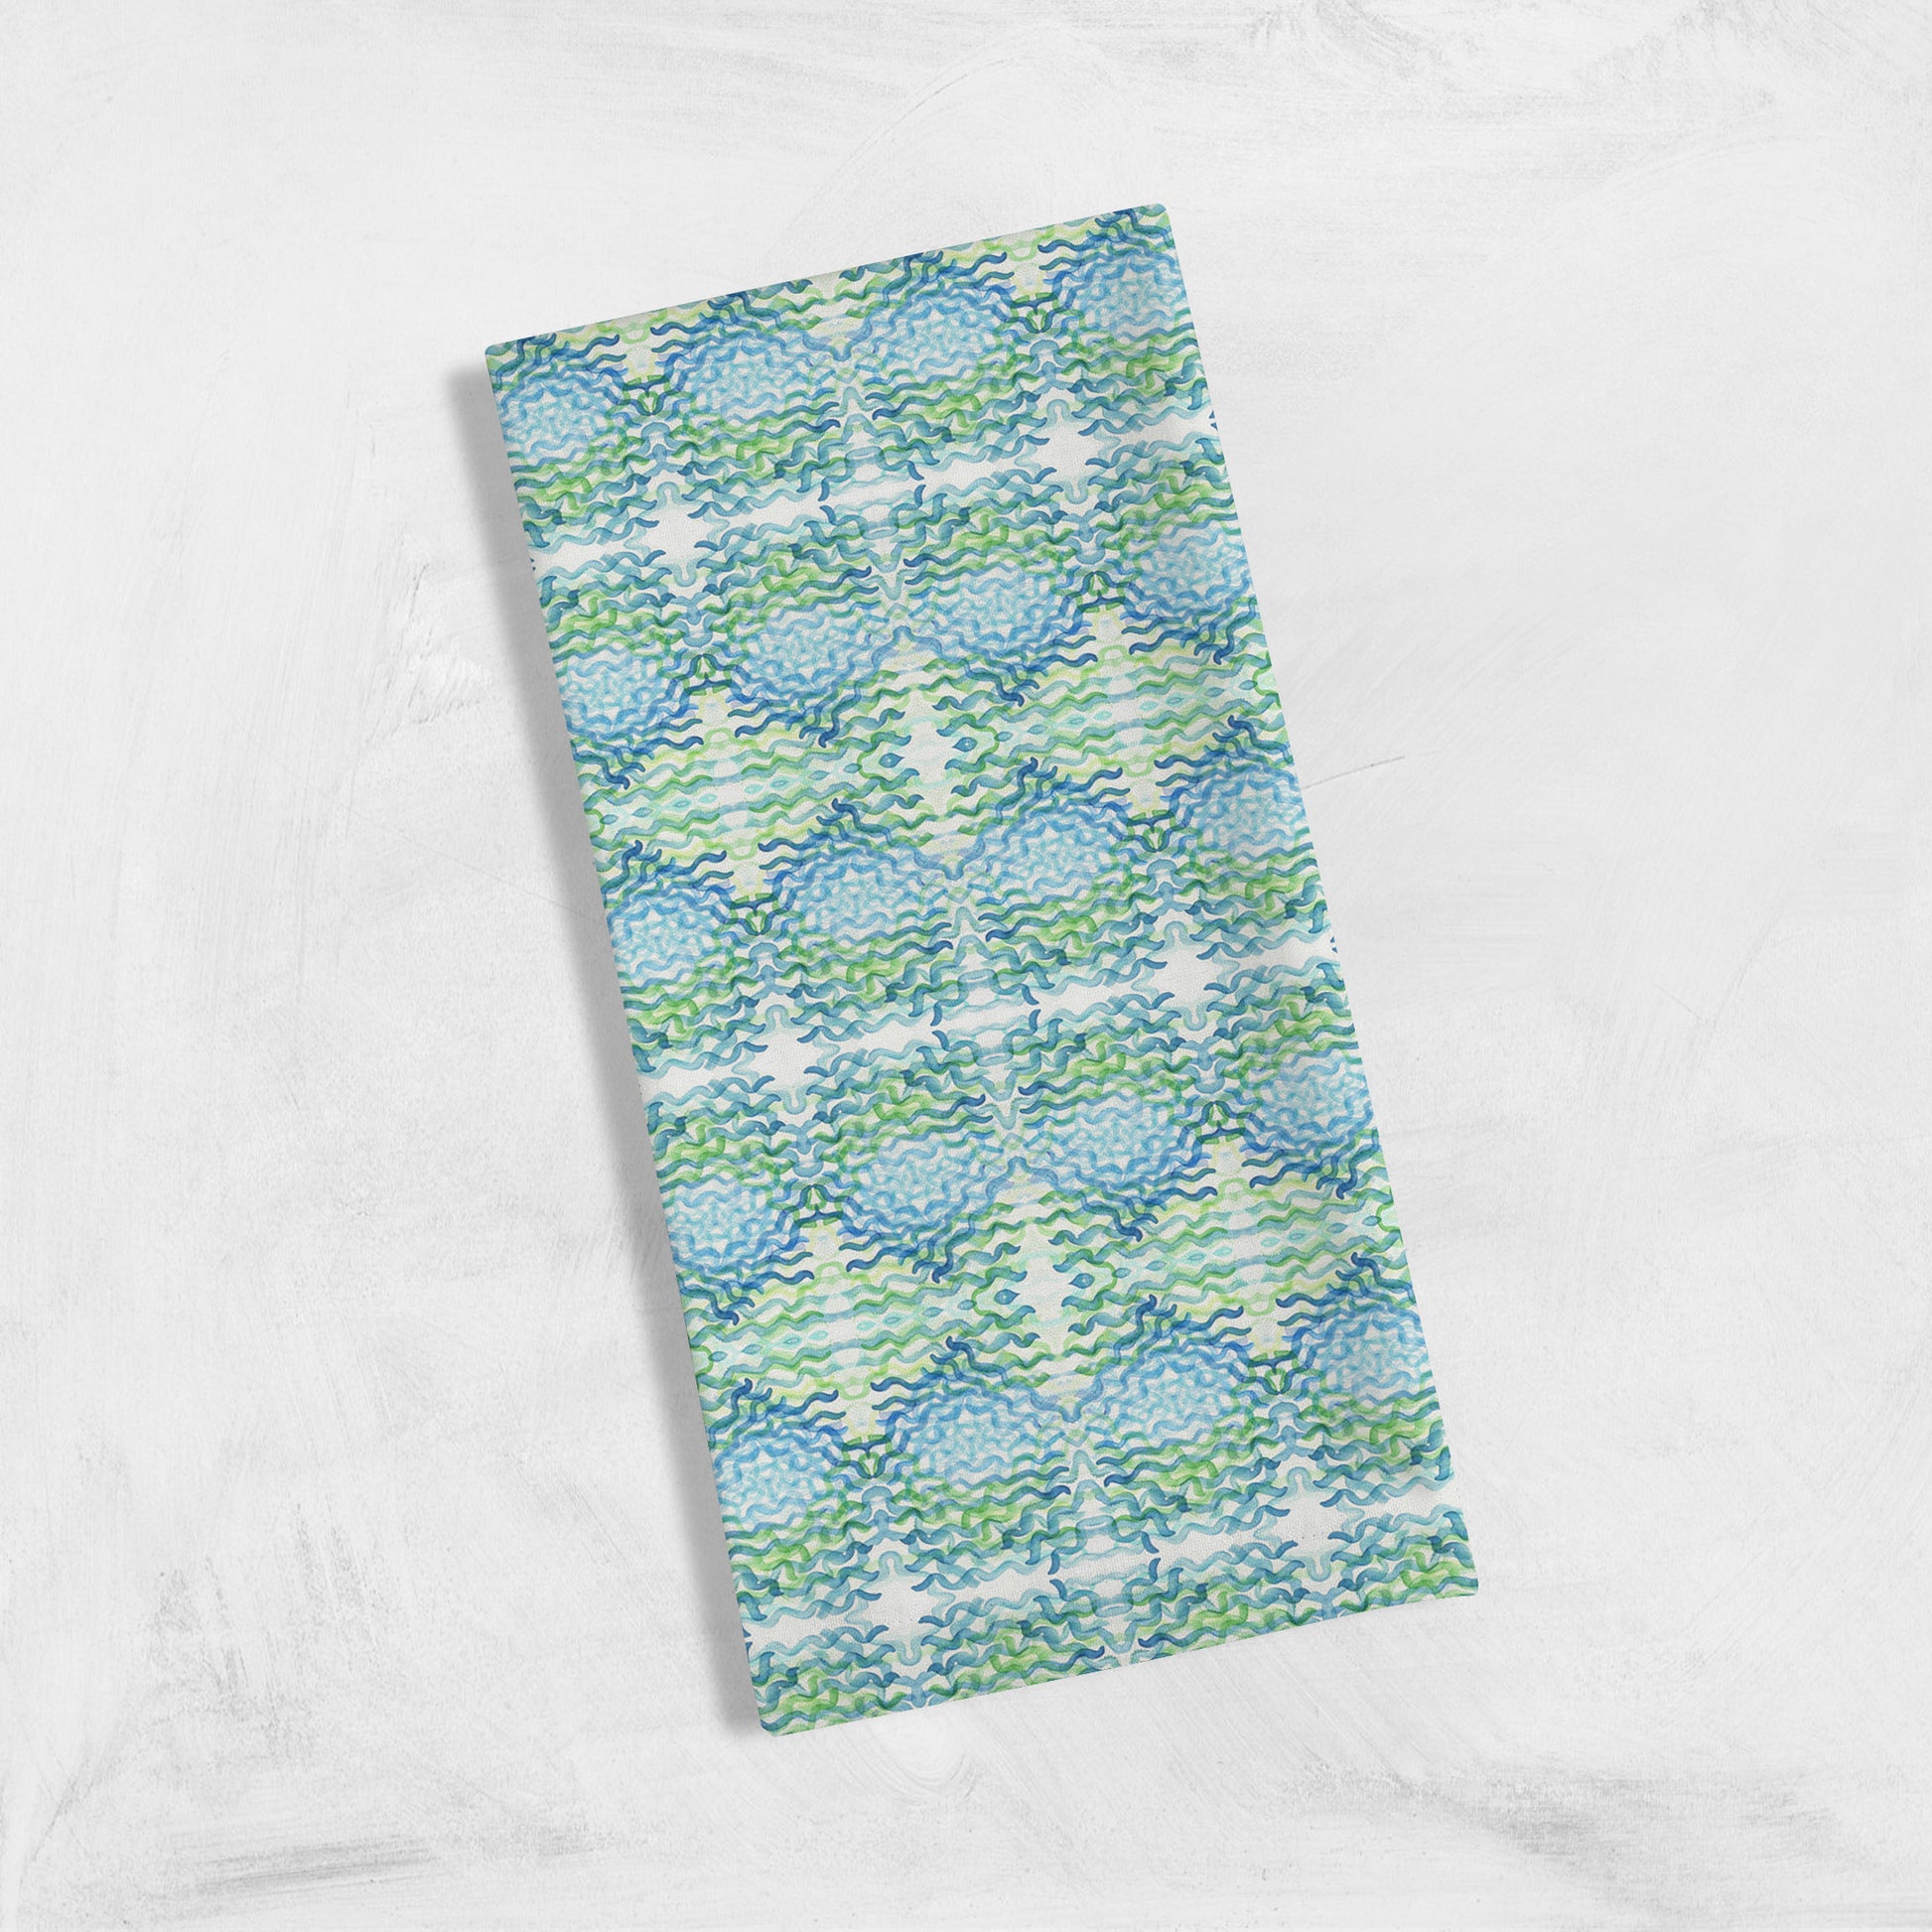 Folded tea towel featuring an abstract blue and green pattern